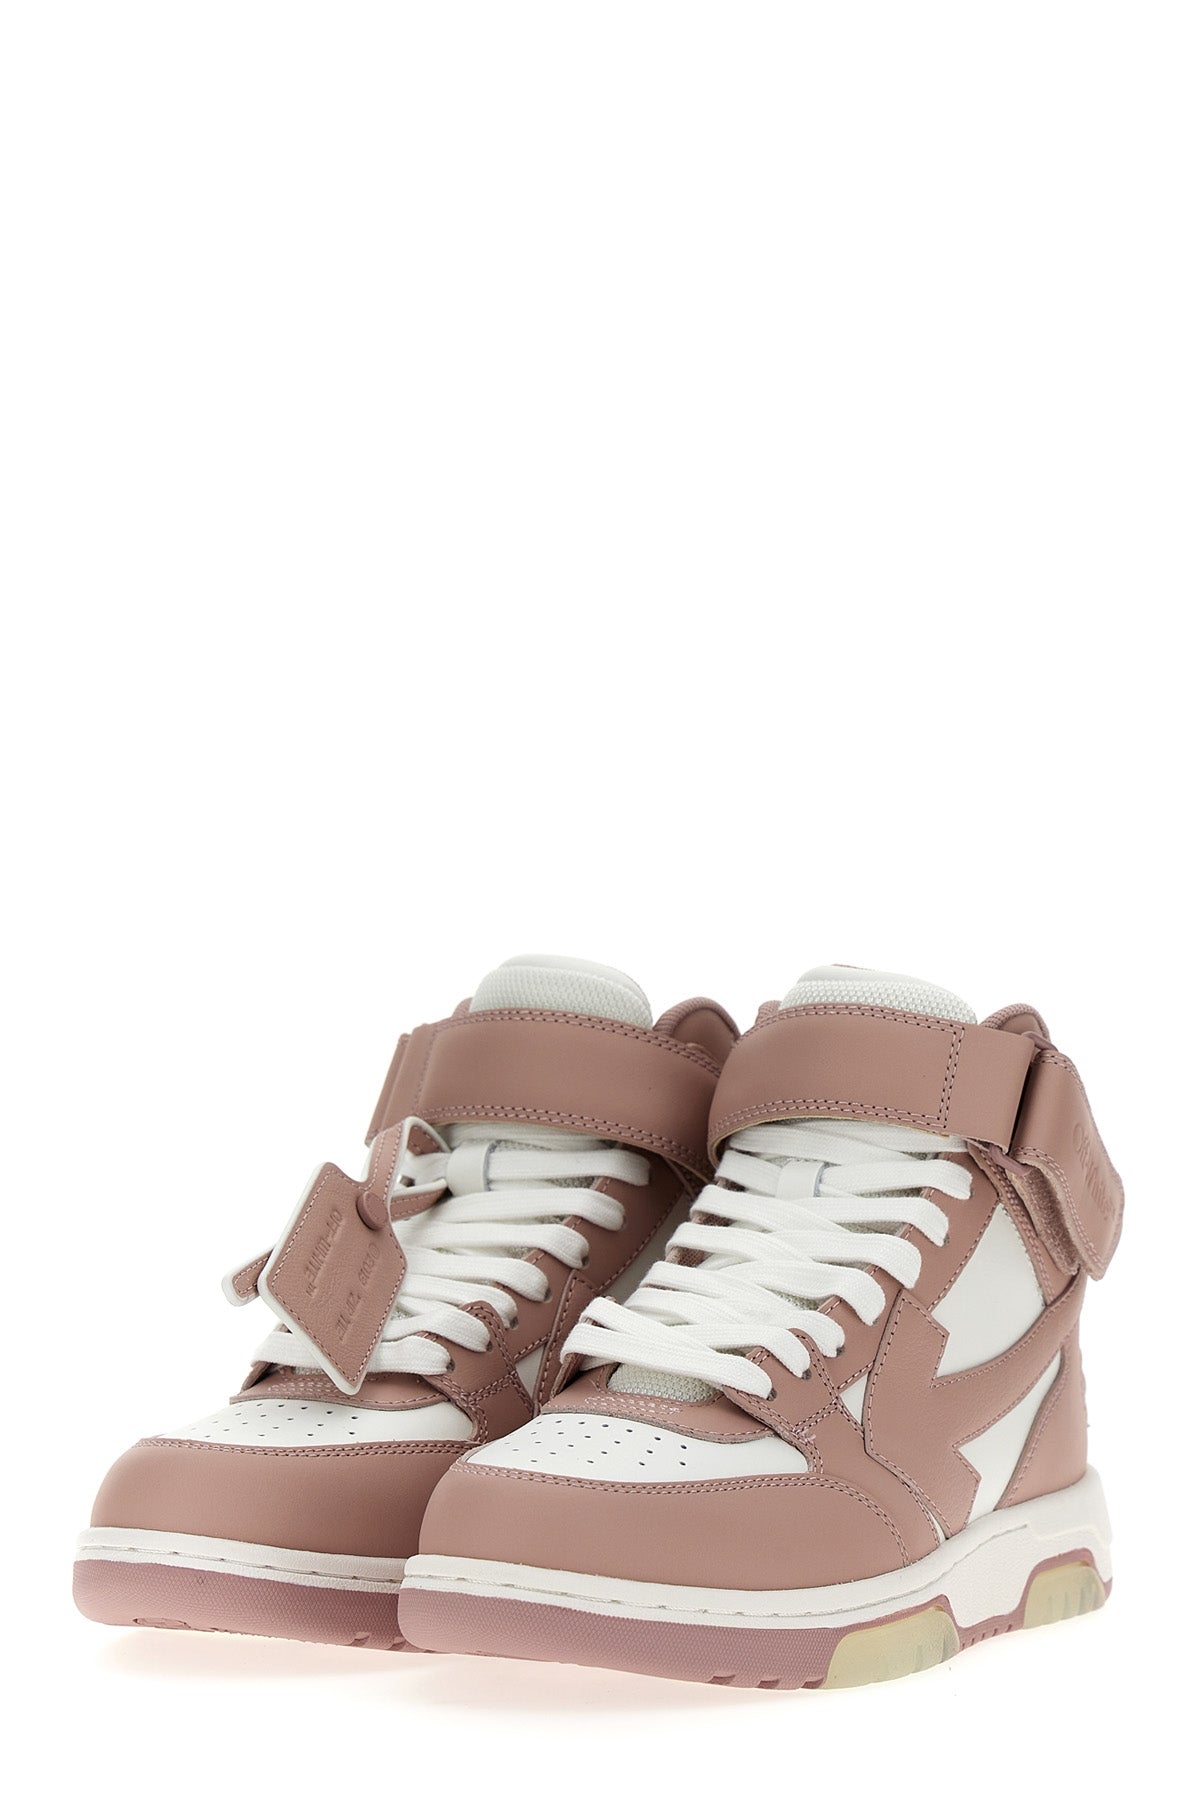 OFF-WHITE 'OUT OF OFFICE MID TOP LEA' SNEAKERS